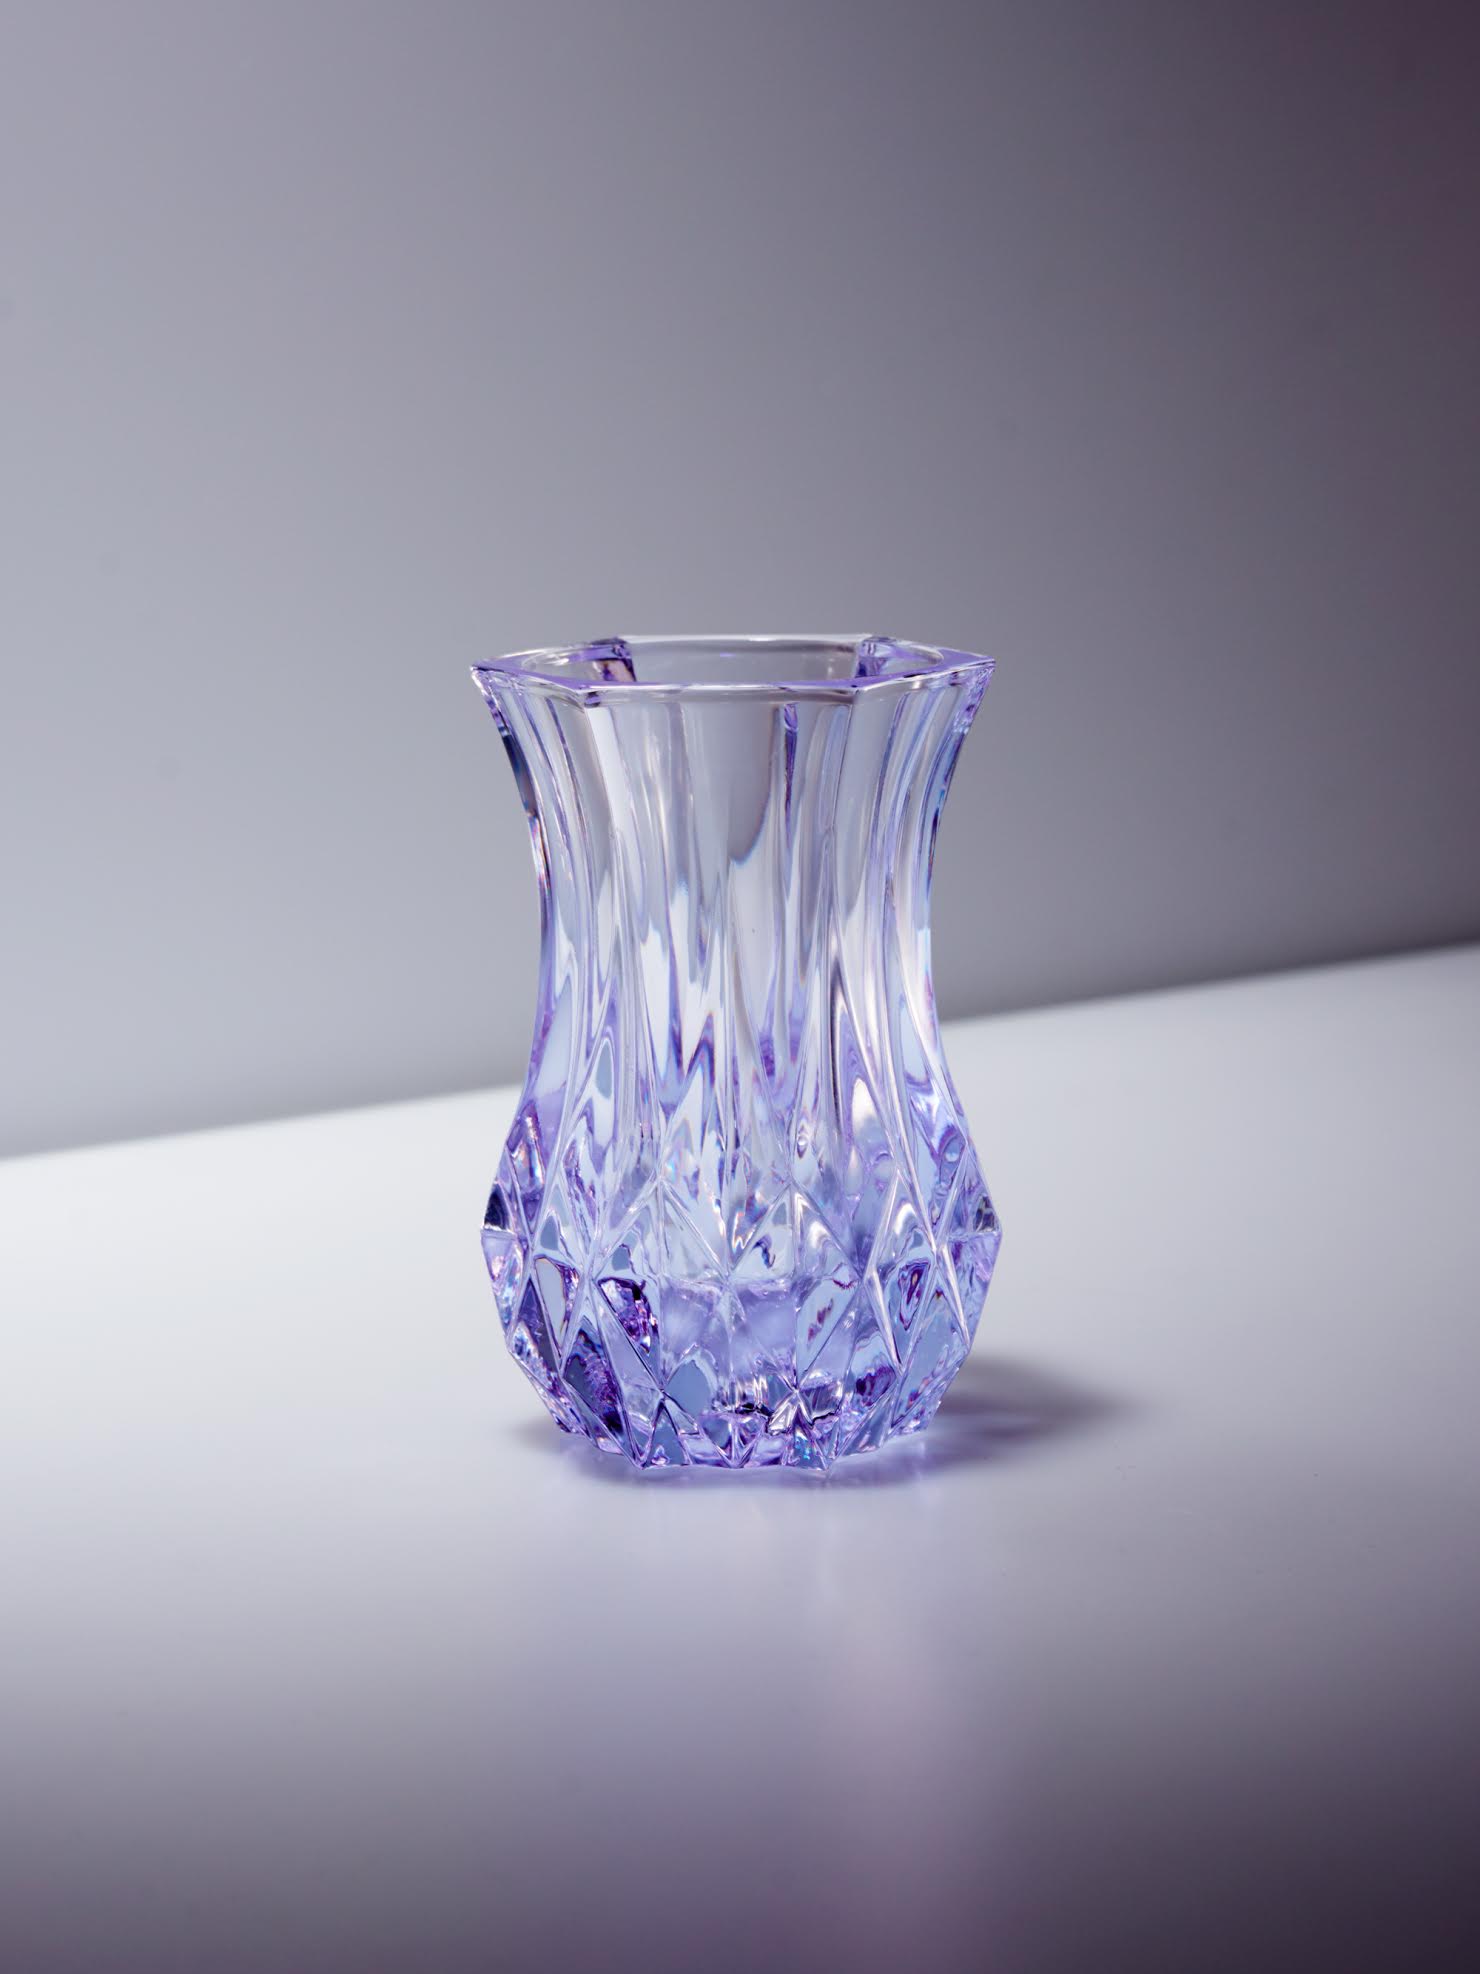 Image of pressed glass from the collection of Marc Camille Chaimowicz (Tears Shared 0)